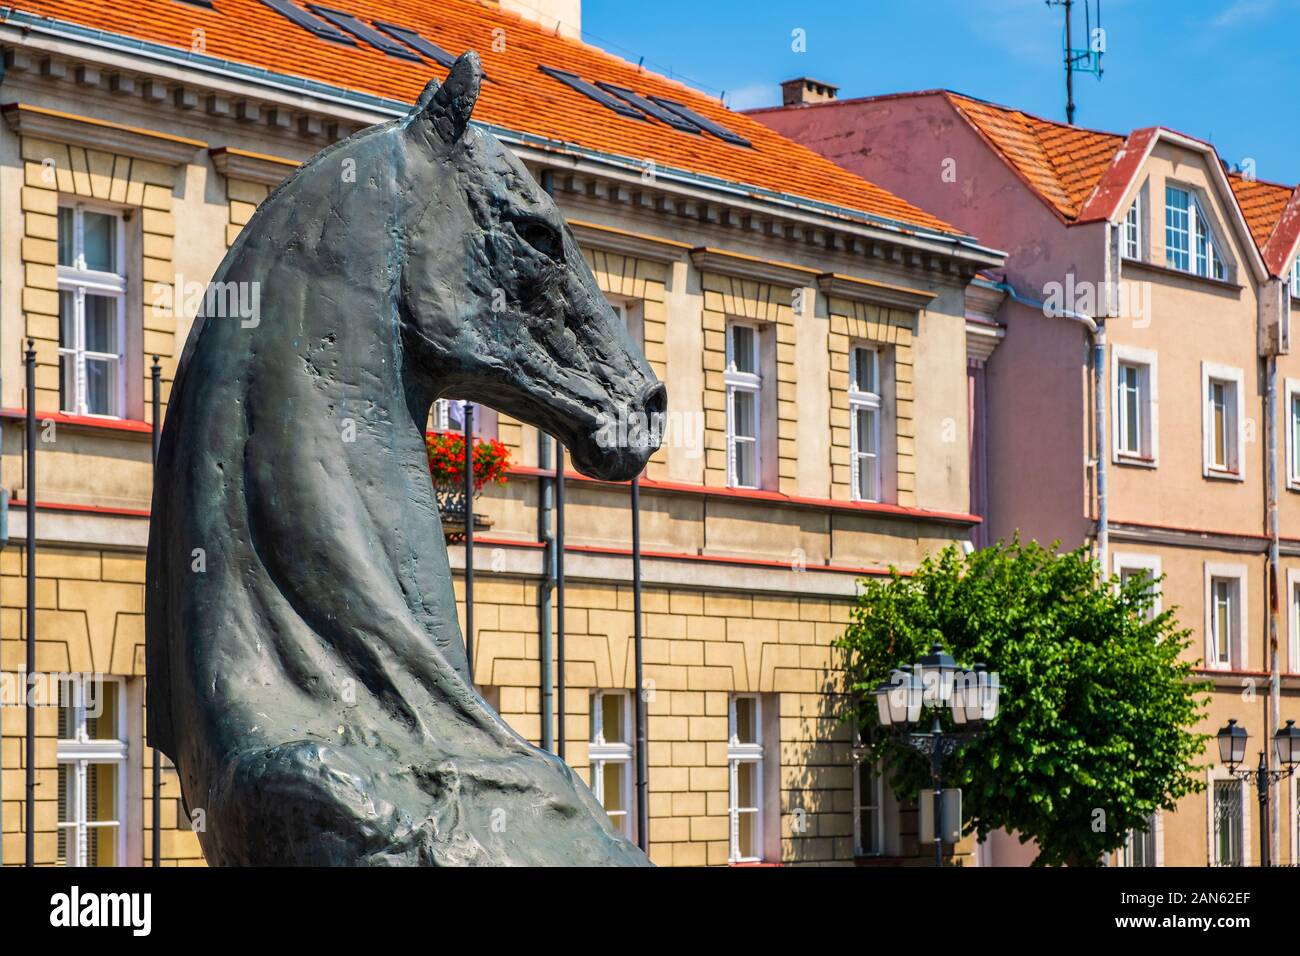 Konin, Greater Poland province / Poland - 2019/06/26: Historic horse statue, symbolic city emblem at the Plac Wolnosci square in the Old Town quarter Stock Photo